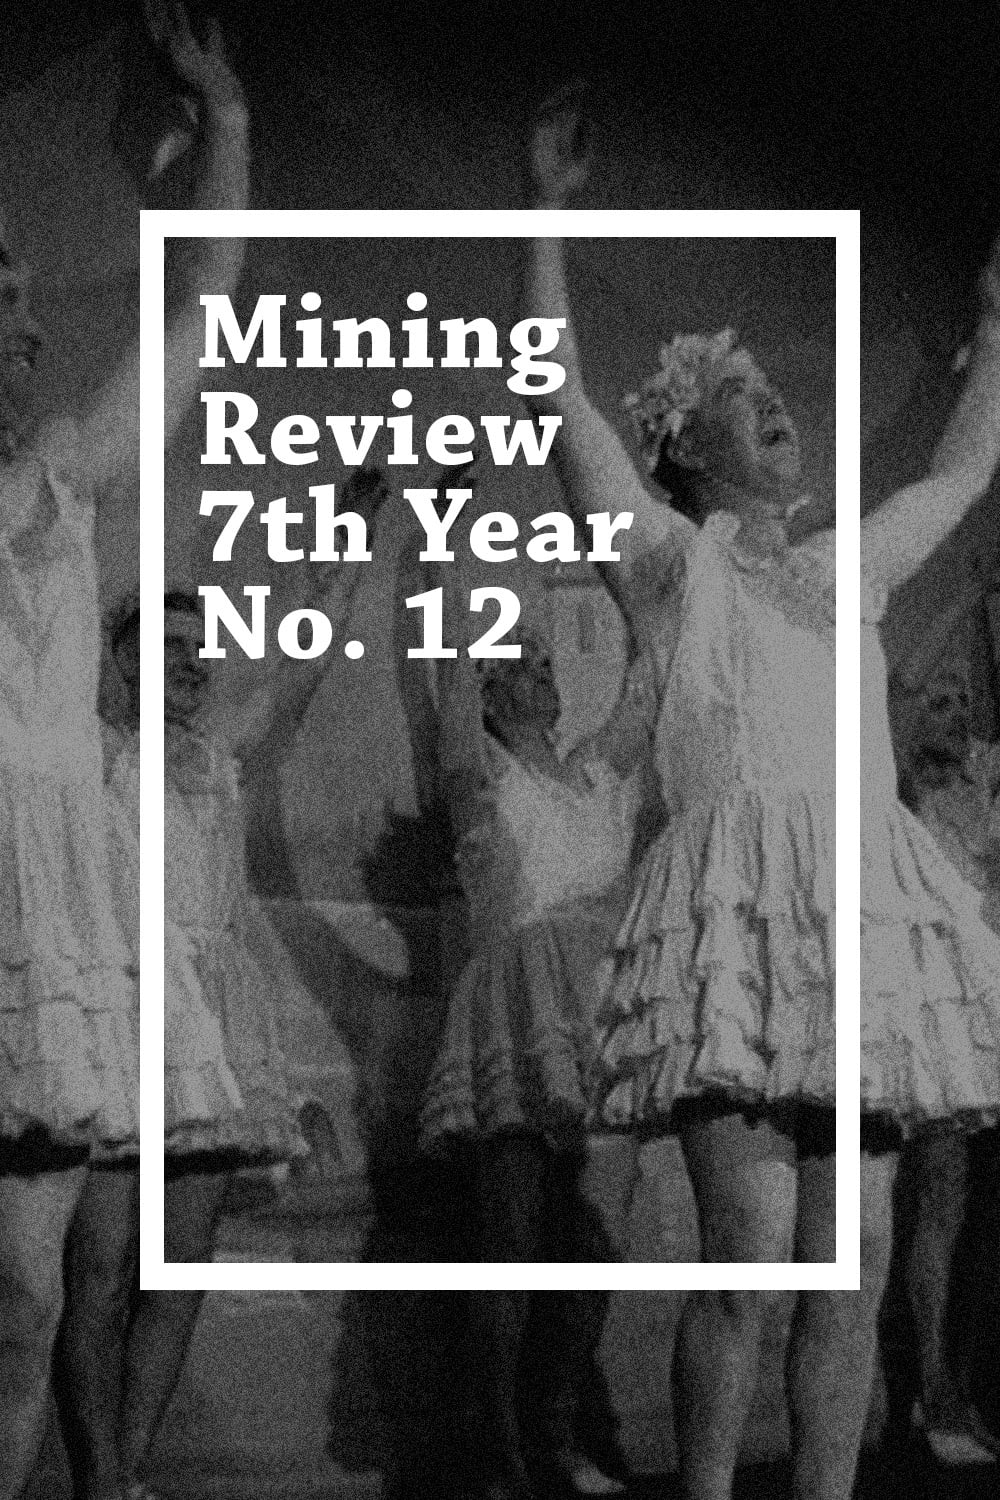 Mining Review 7th Year No. 12